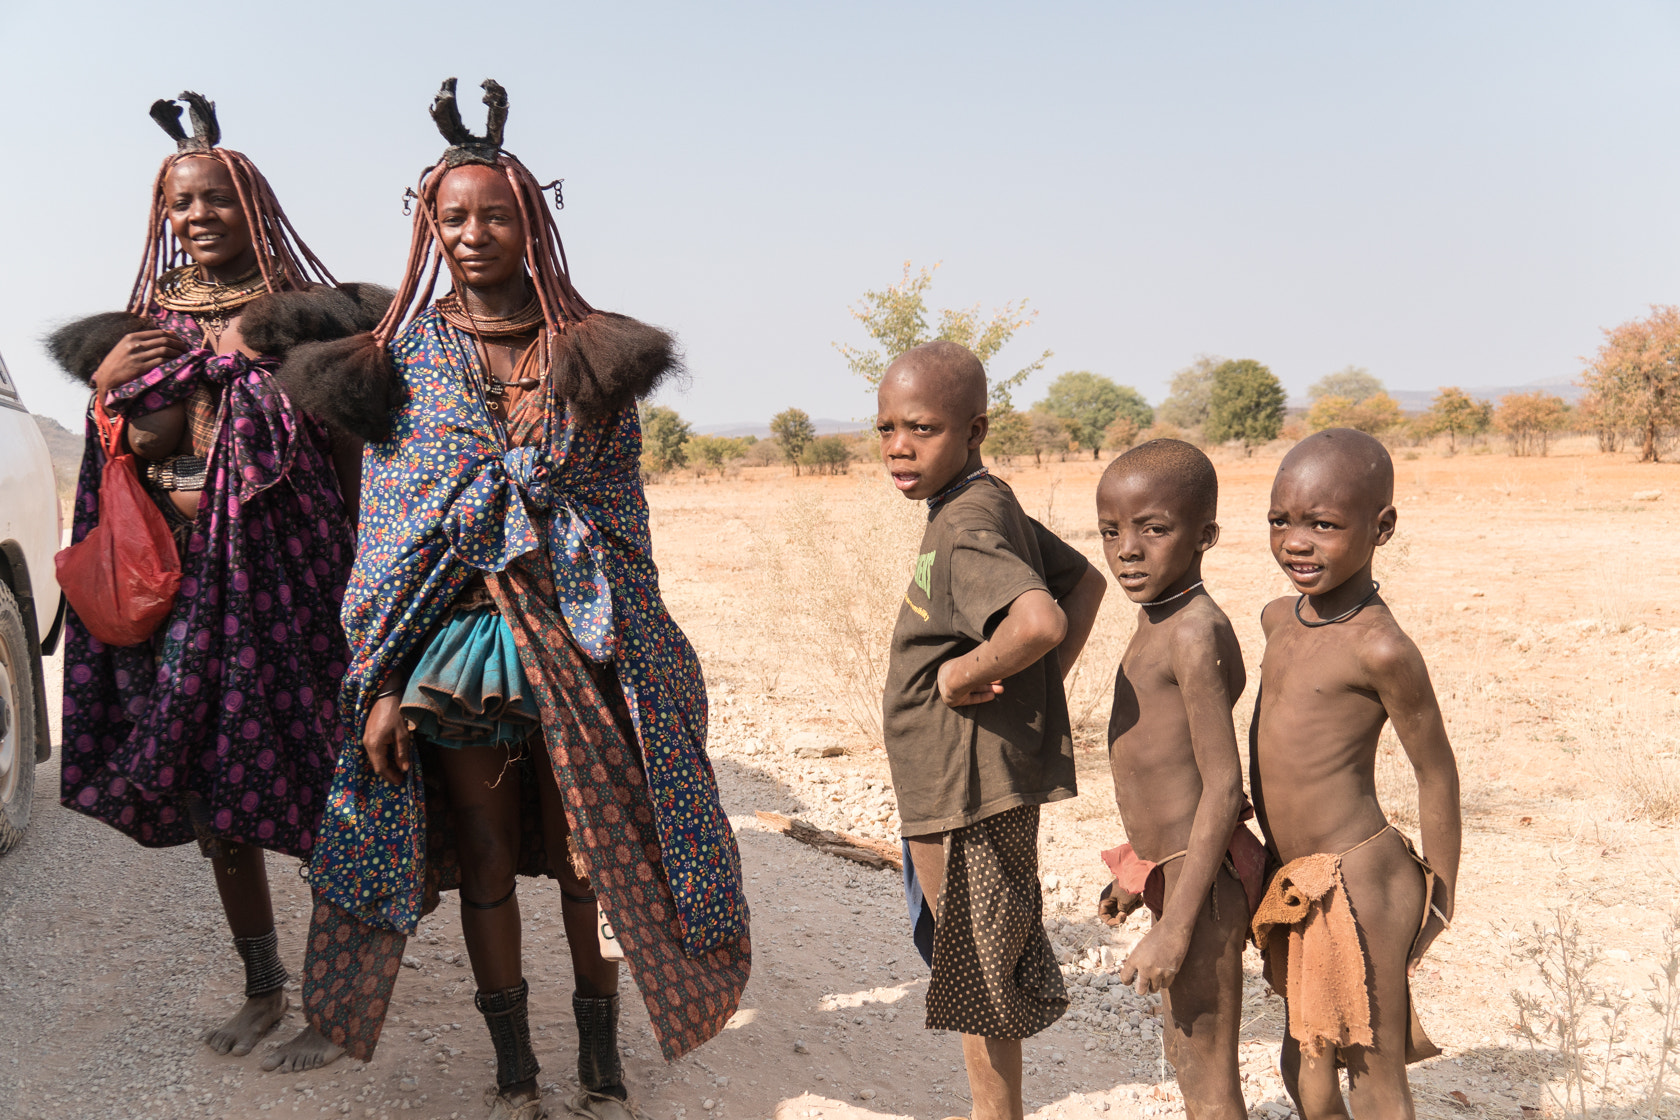 Sony a6300 sample photo. Asking for water, himba, namibia photography